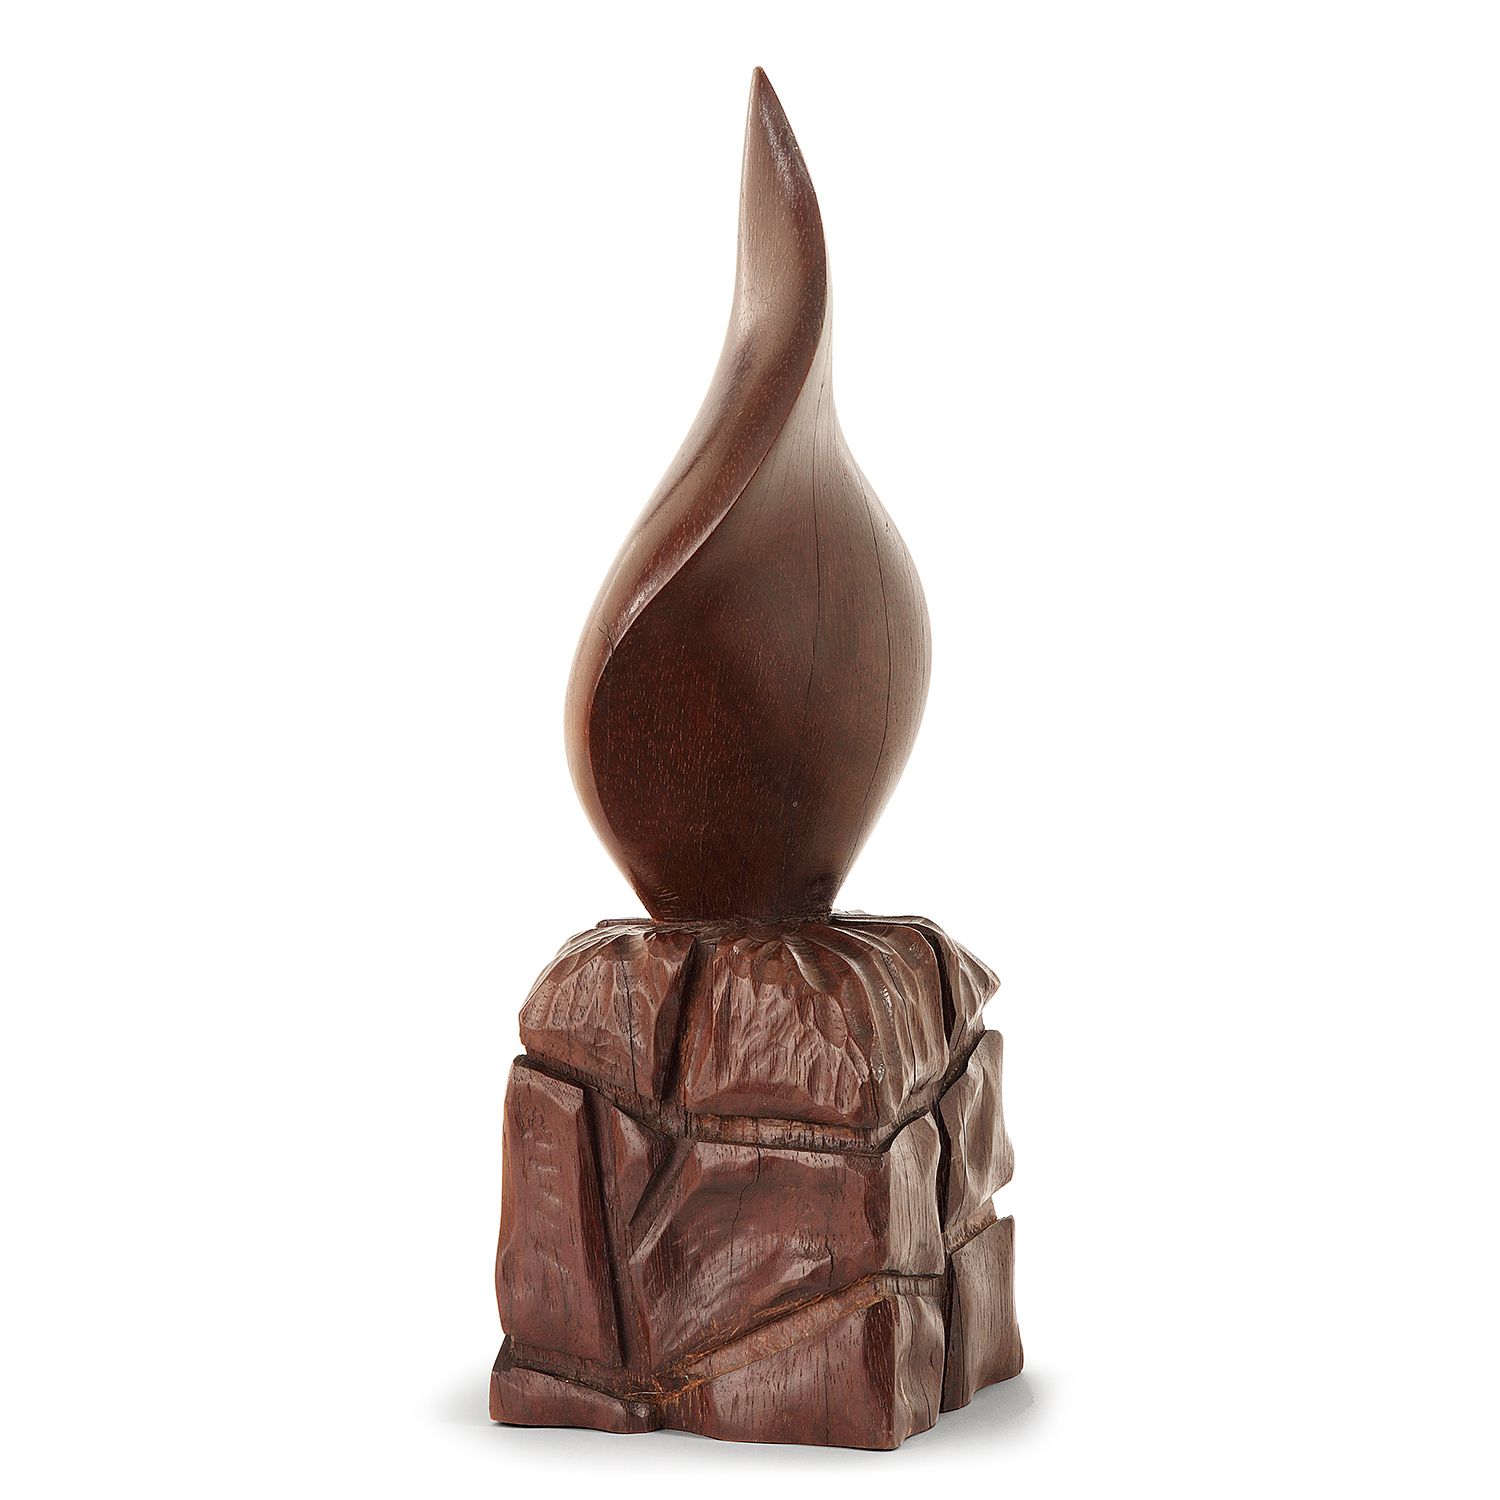 Null ALEXANDRE NOLL (1890-1970)

Flame sculpture in rosewood, truncated cone-sha&hellip;